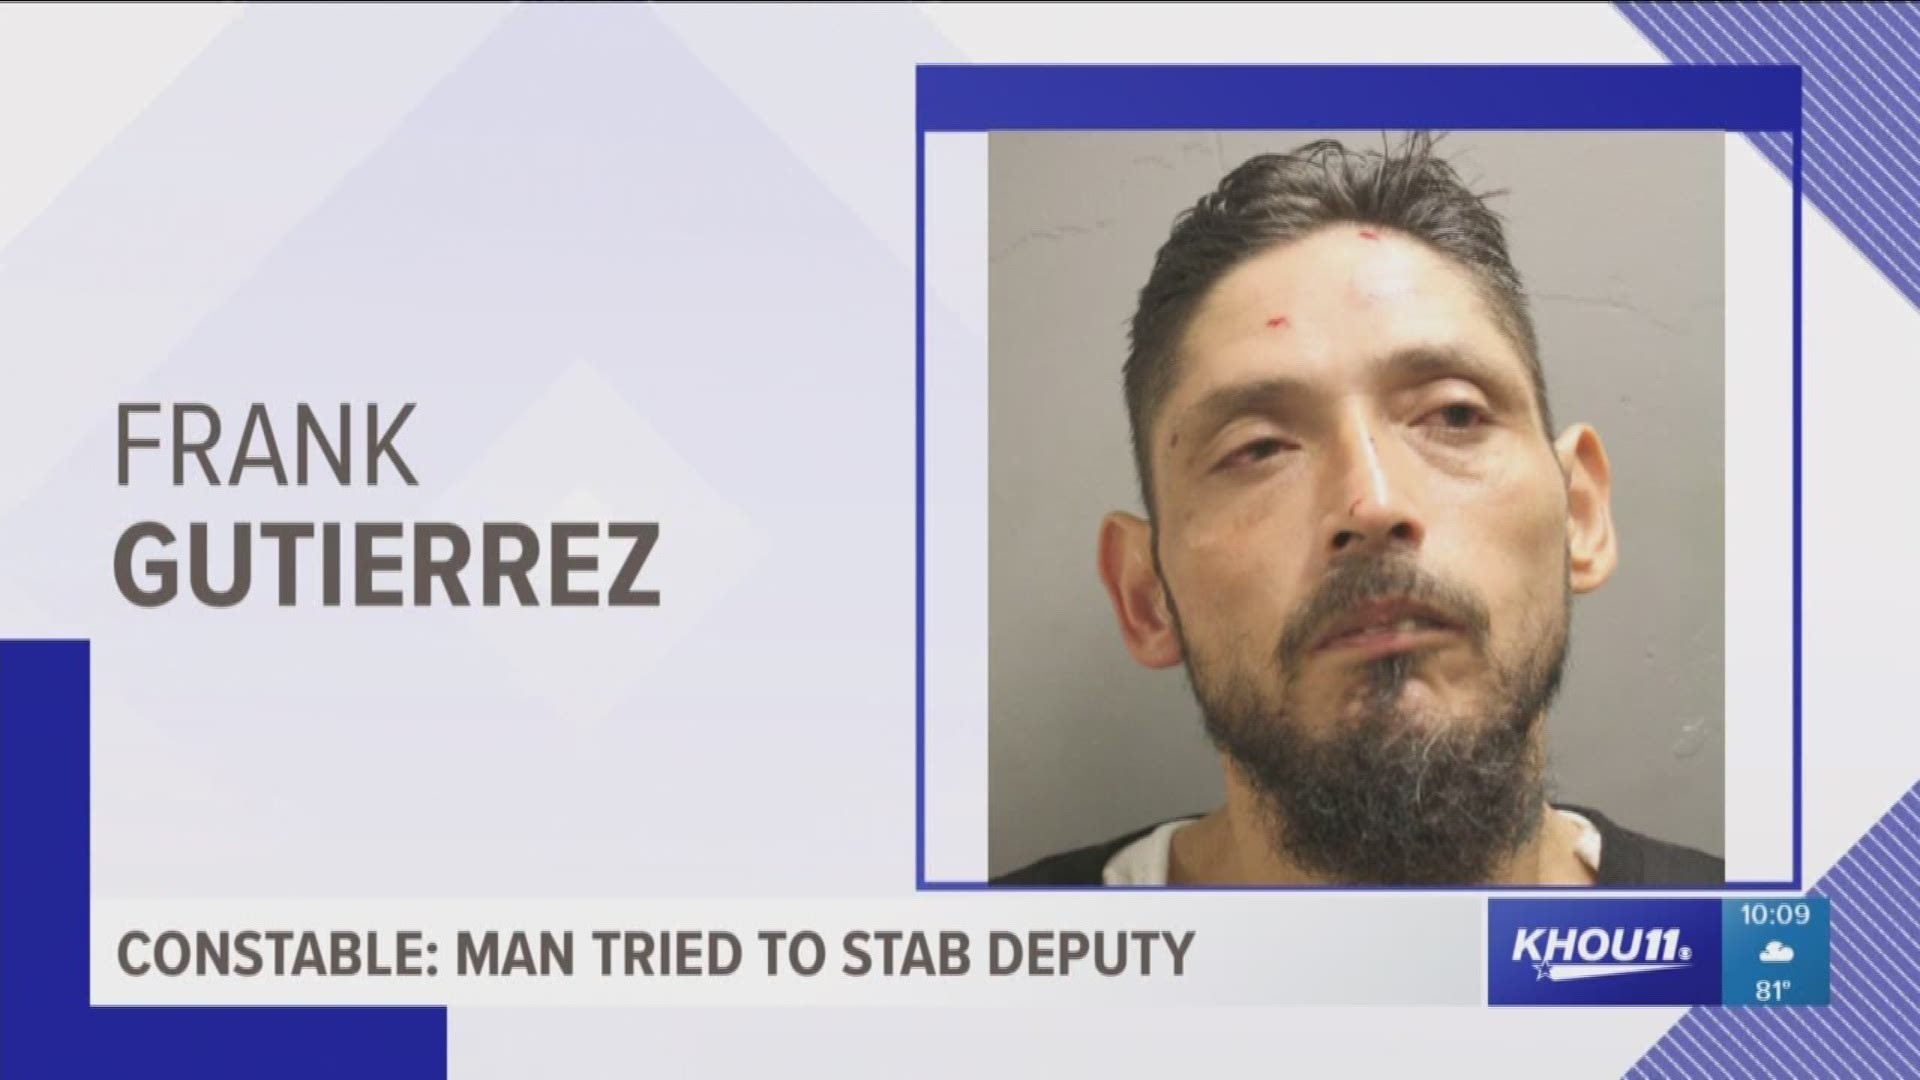 A suspect was arrested Tuesday after he allegedly tried stabbing a Harris County Precinct 4 deputy constable.